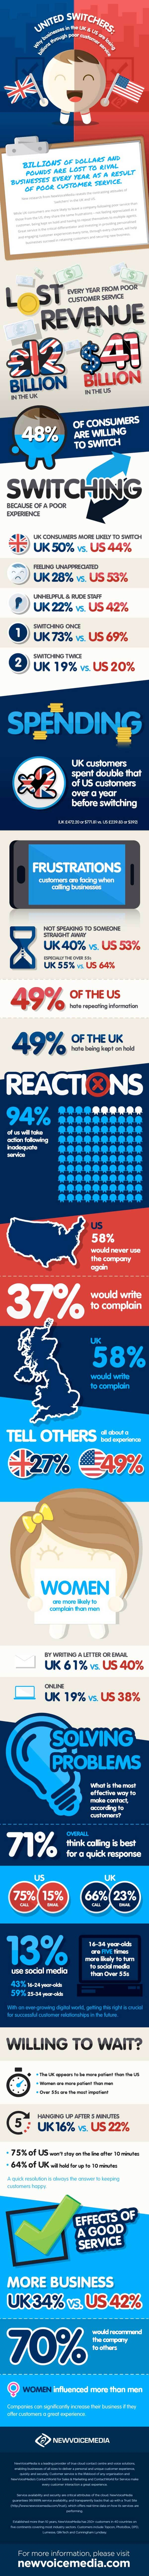 NVM_infographic_customerservice_blog1